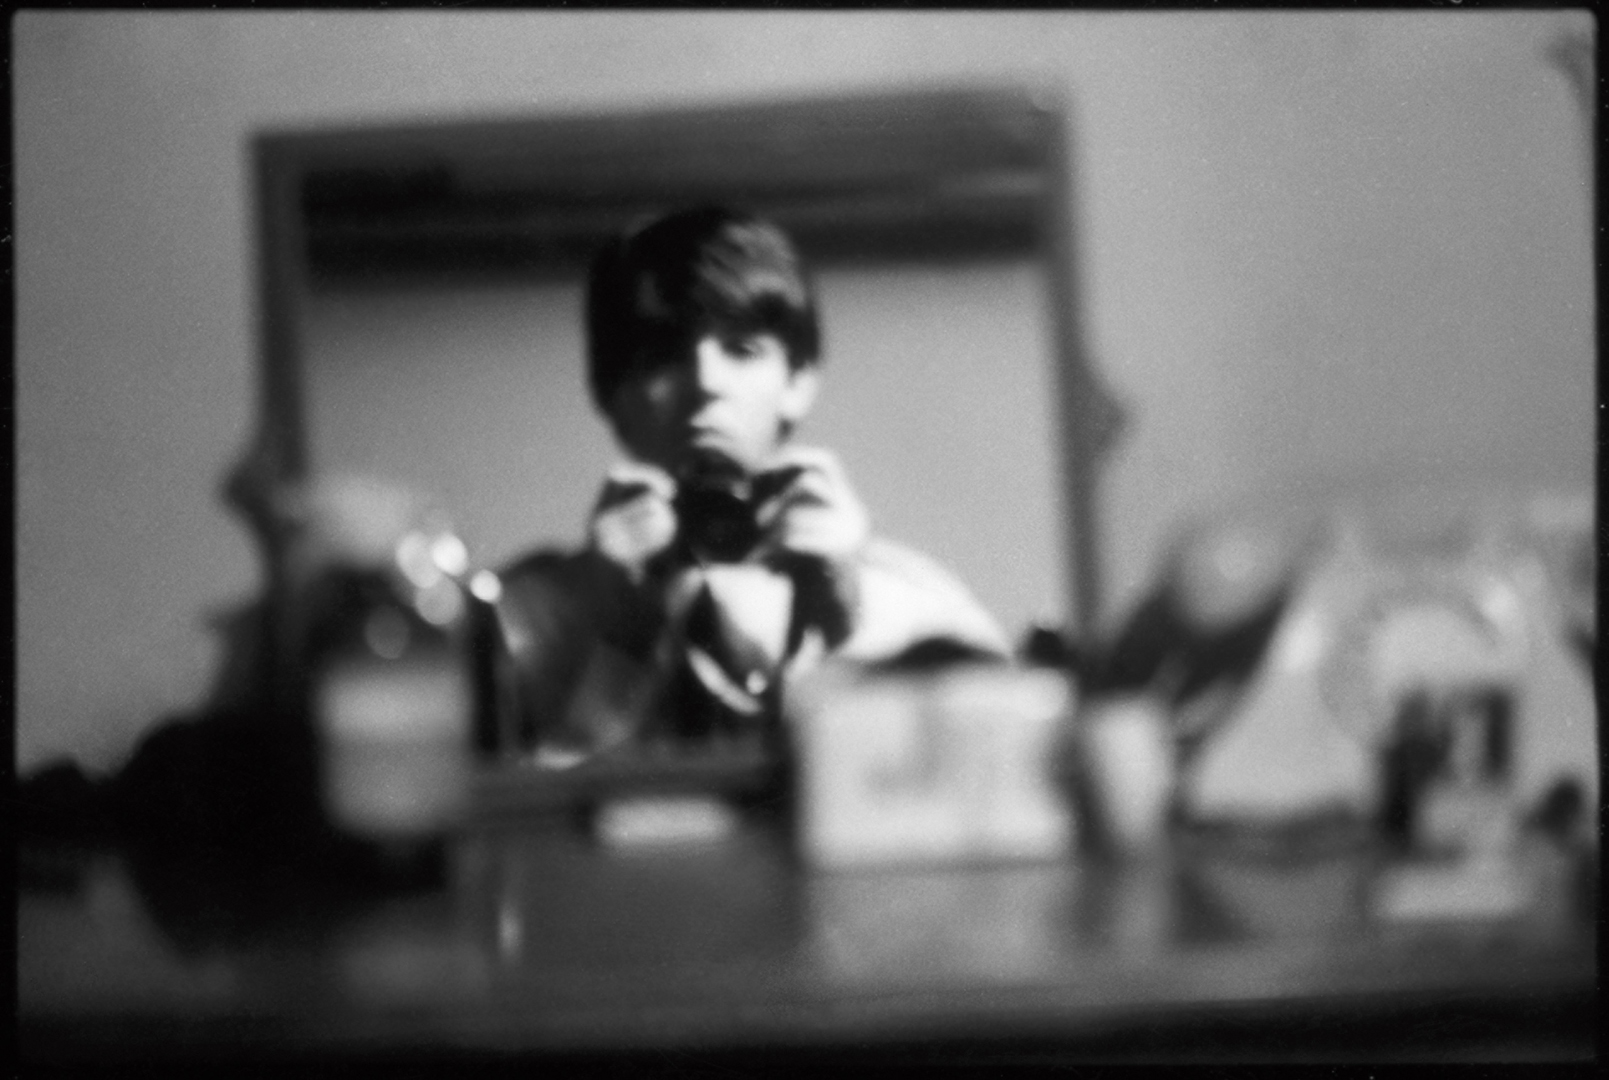 Paul McCartney photographs his reflection in a mirror.